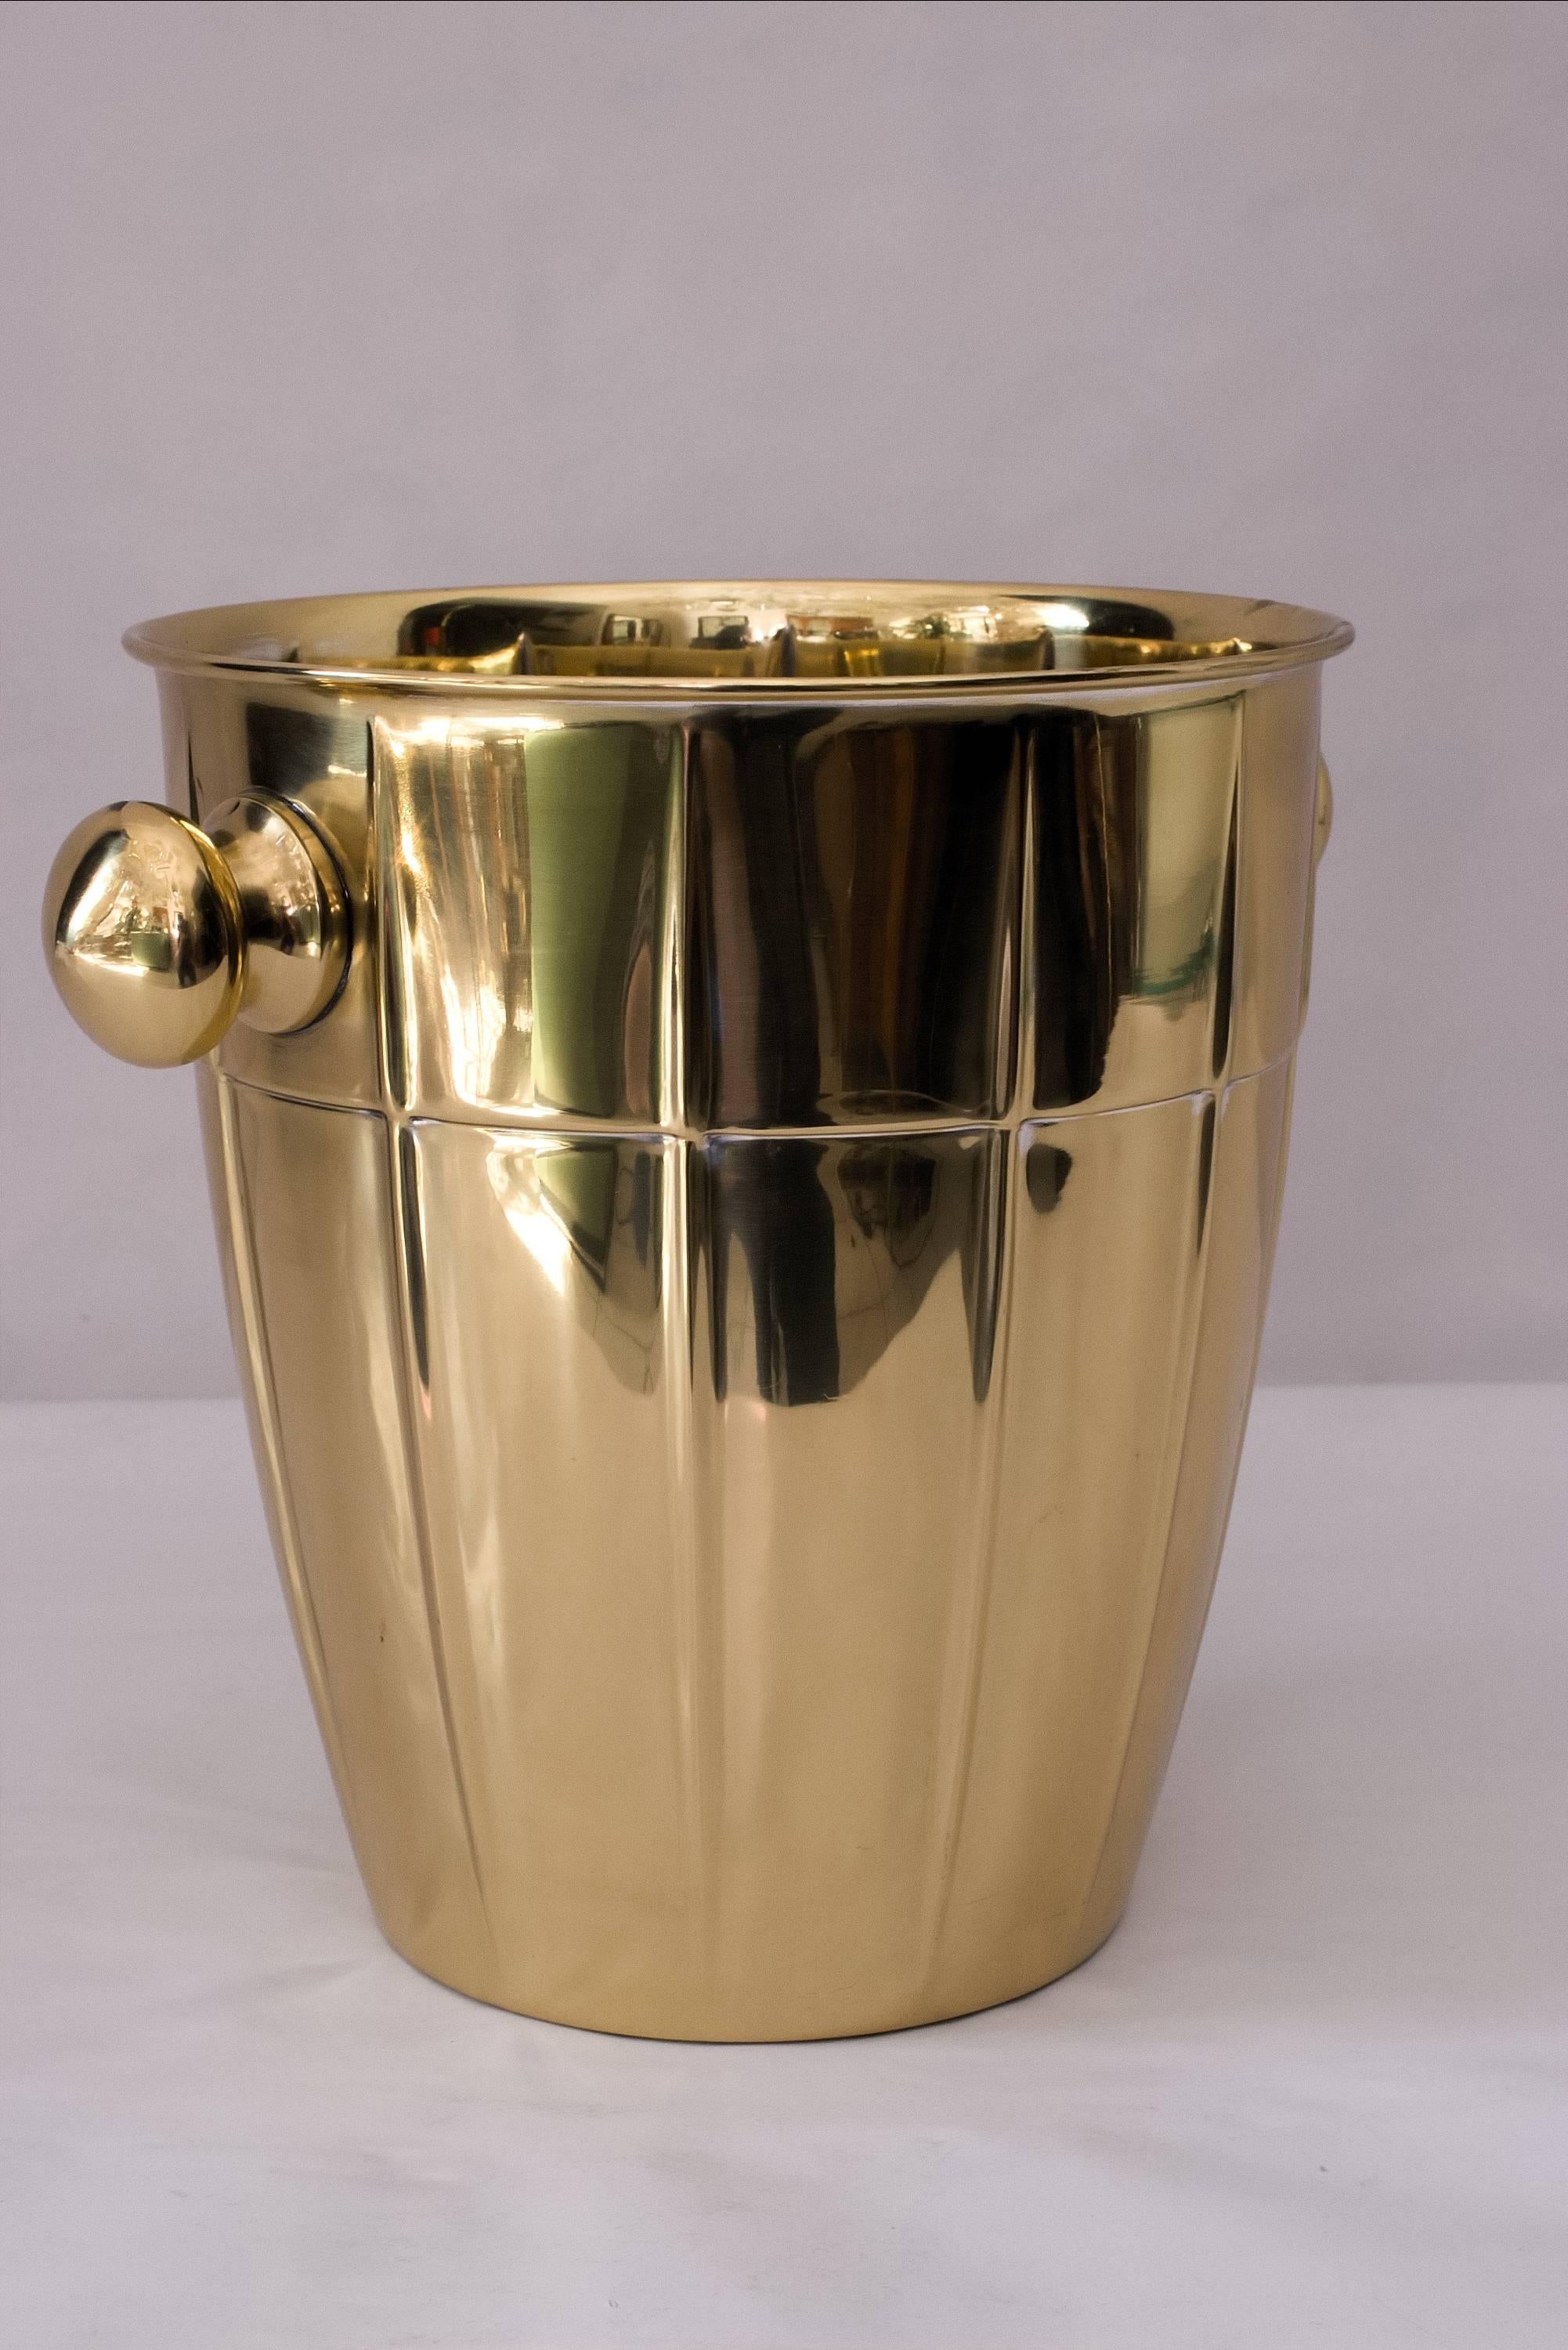 Art Nouveau brass champagne cooler
polished and stove enamelled.